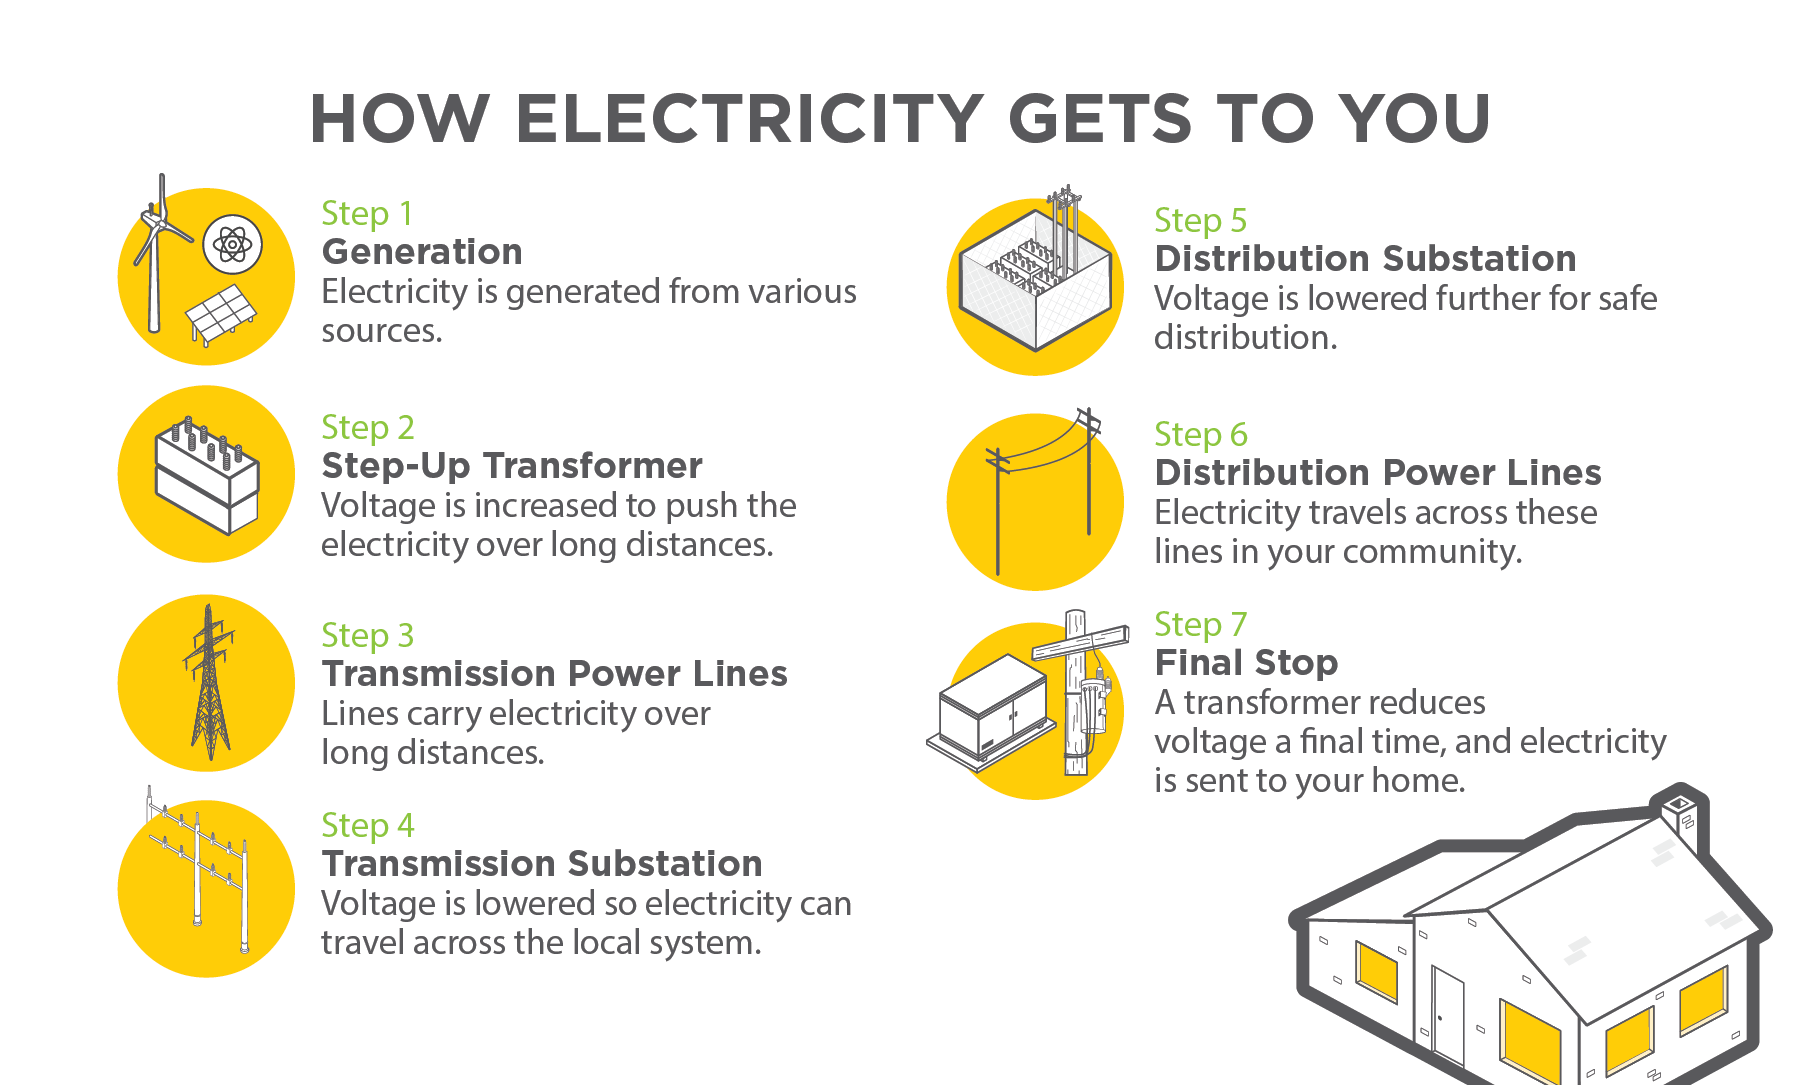 HOW ELECTRICITY GETS TO YOU. Step 1: Generation. Electricity is generated from various sources. Step 2: Step-Up Transformer. Voltage is increased to push the electricity over long distances. Step 3: Transmission Power Lines. Lines carry electricity over long distances. Step 4: Transmission Substation. Voltage is lowered so electricity can travel across the local system. Step 5: Distribution Substation. Voltage is lowered further for safe distribution. Step 6: Distribution Power Lines. Electricity travels across these lines in your community. Step 7: Final Stop. A transformer reduces voltage a final time, and electricity is sent to your home.